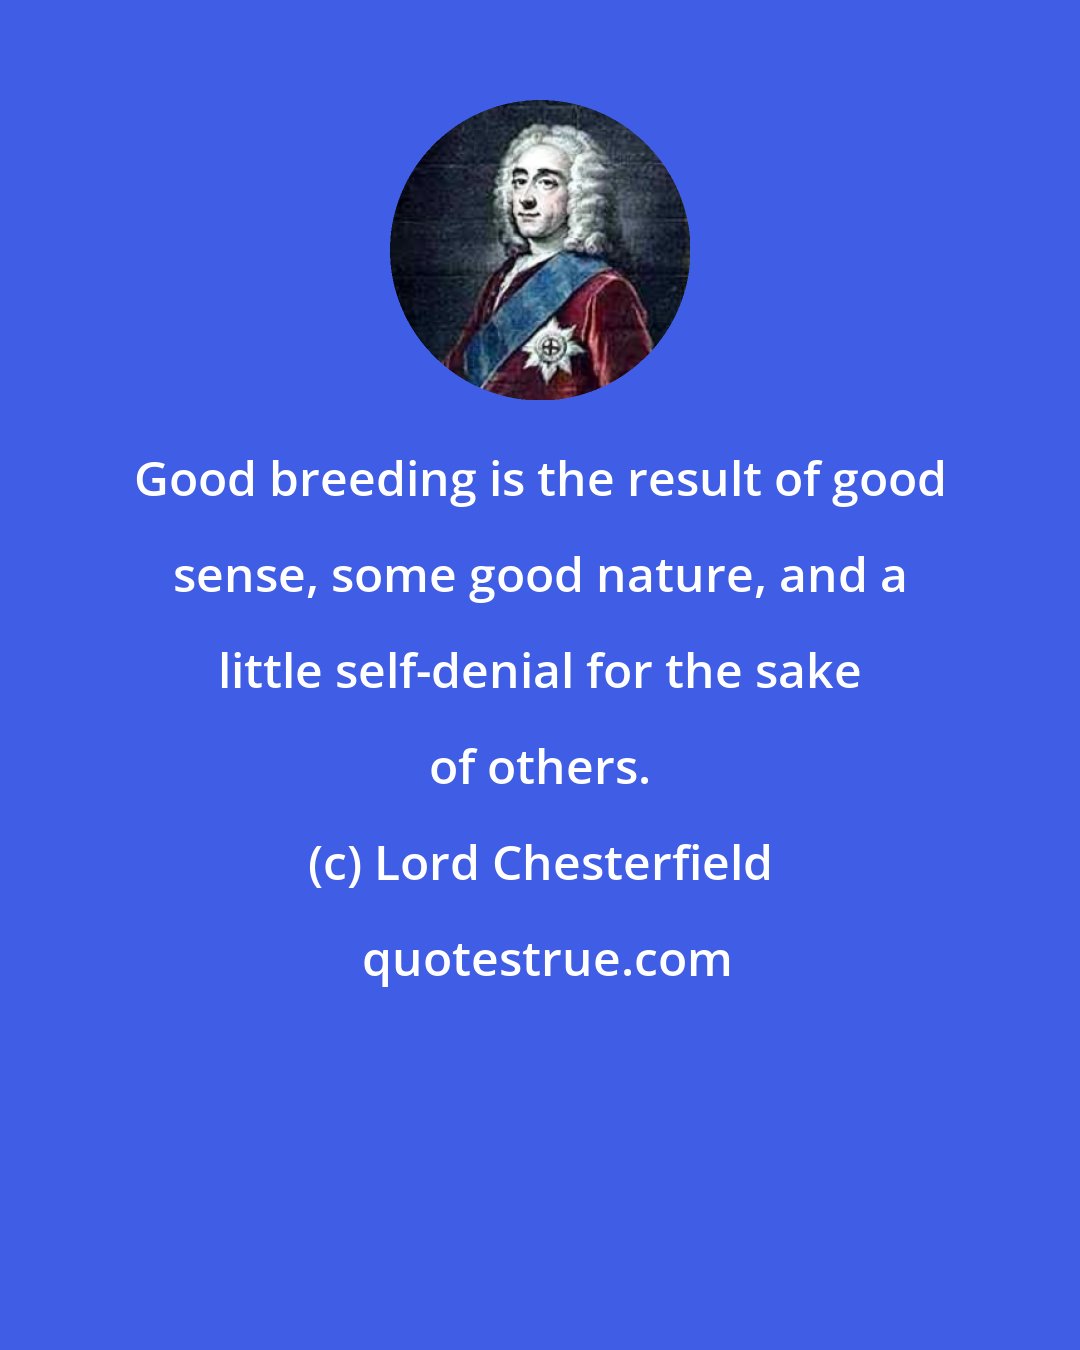 Lord Chesterfield: Good breeding is the result of good sense, some good nature, and a little self-denial for the sake of others.